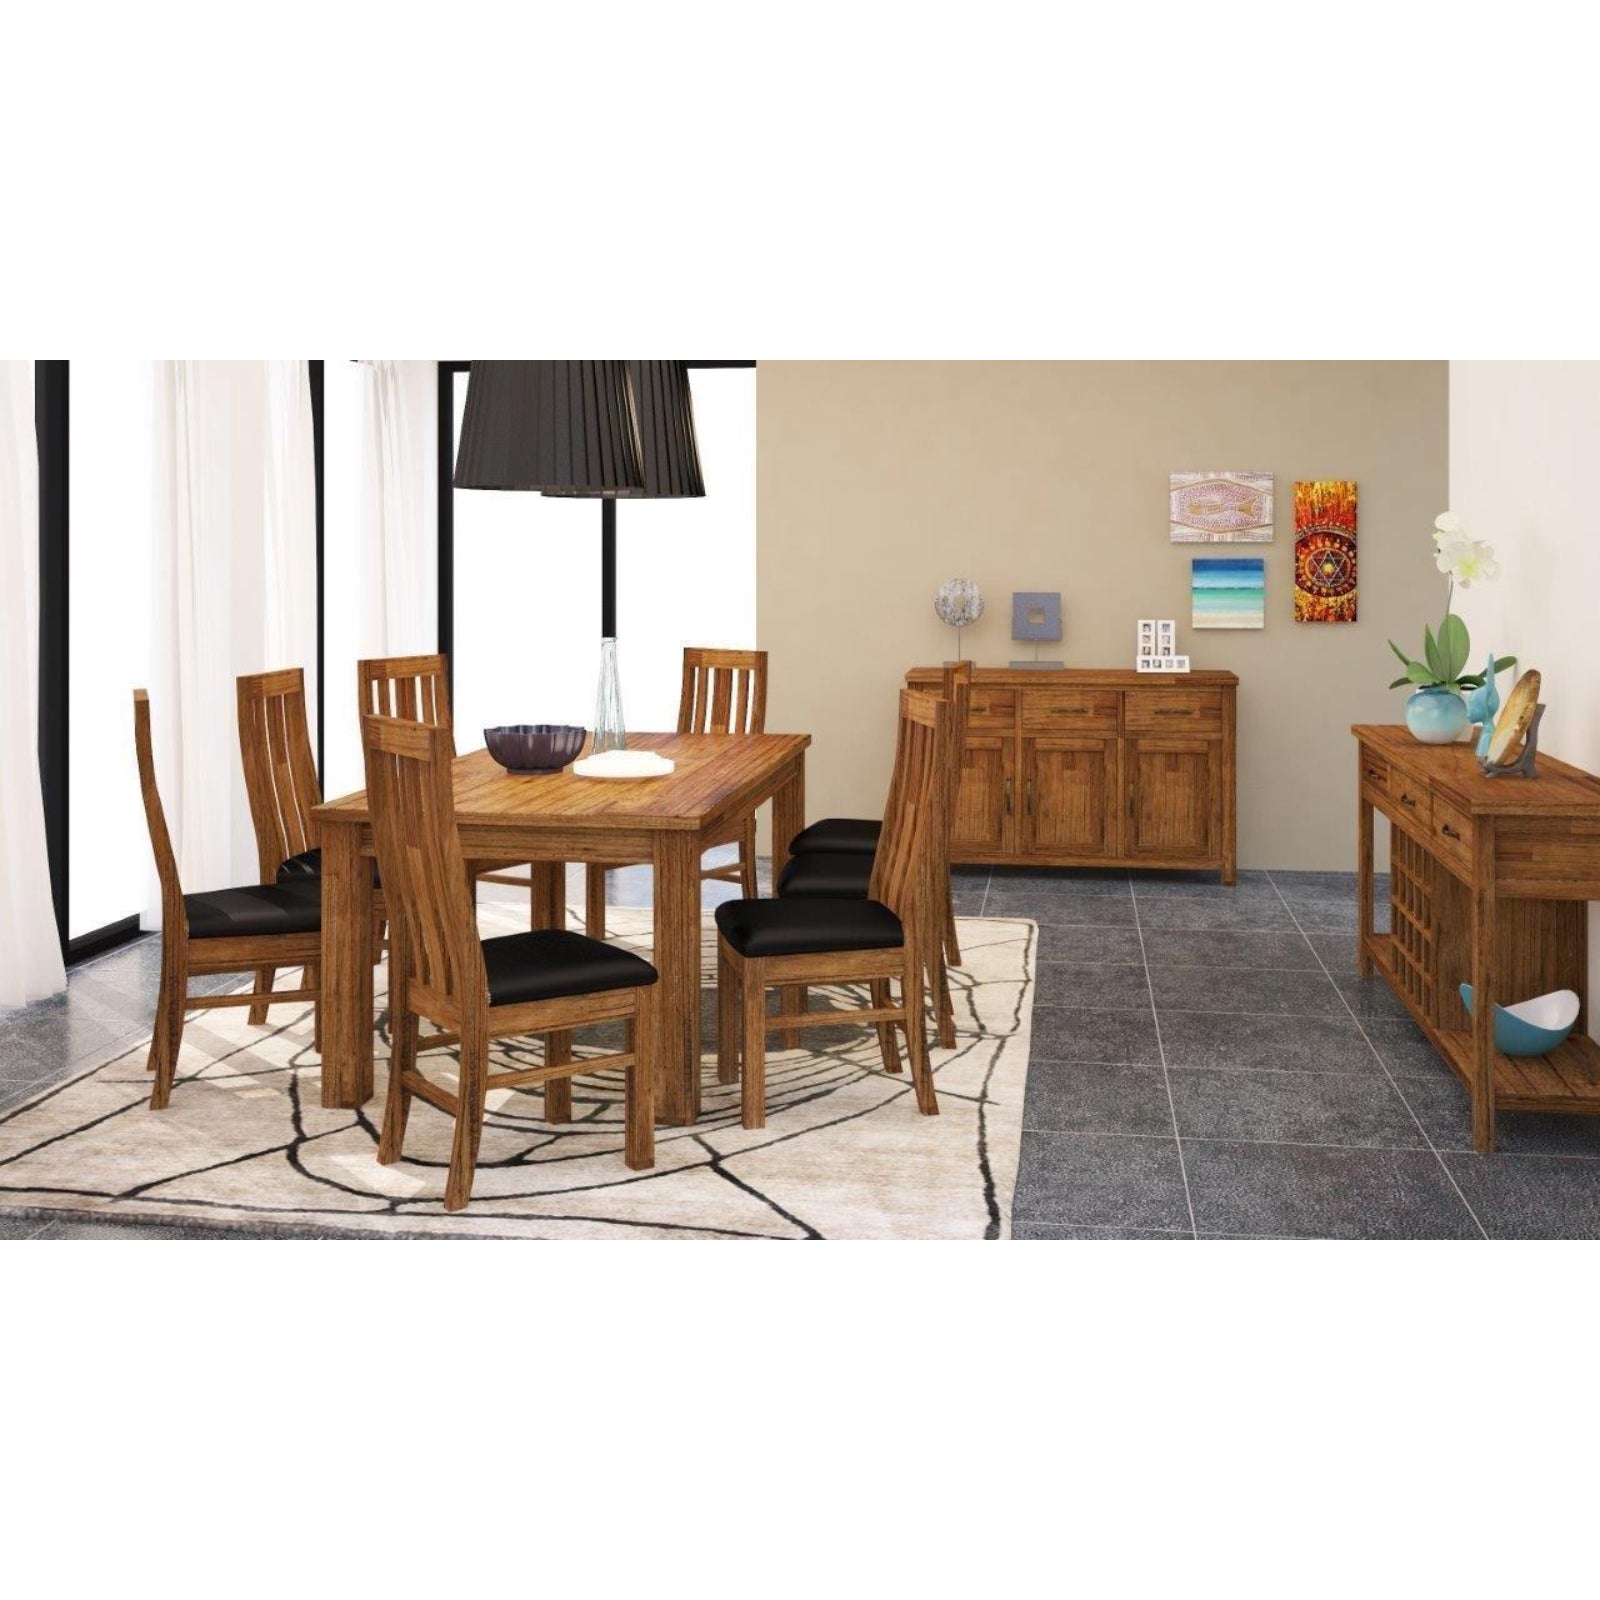 Pu Seat Dining Chair Set Of 2 Solid Ash Wood Dining Furniture -Brown